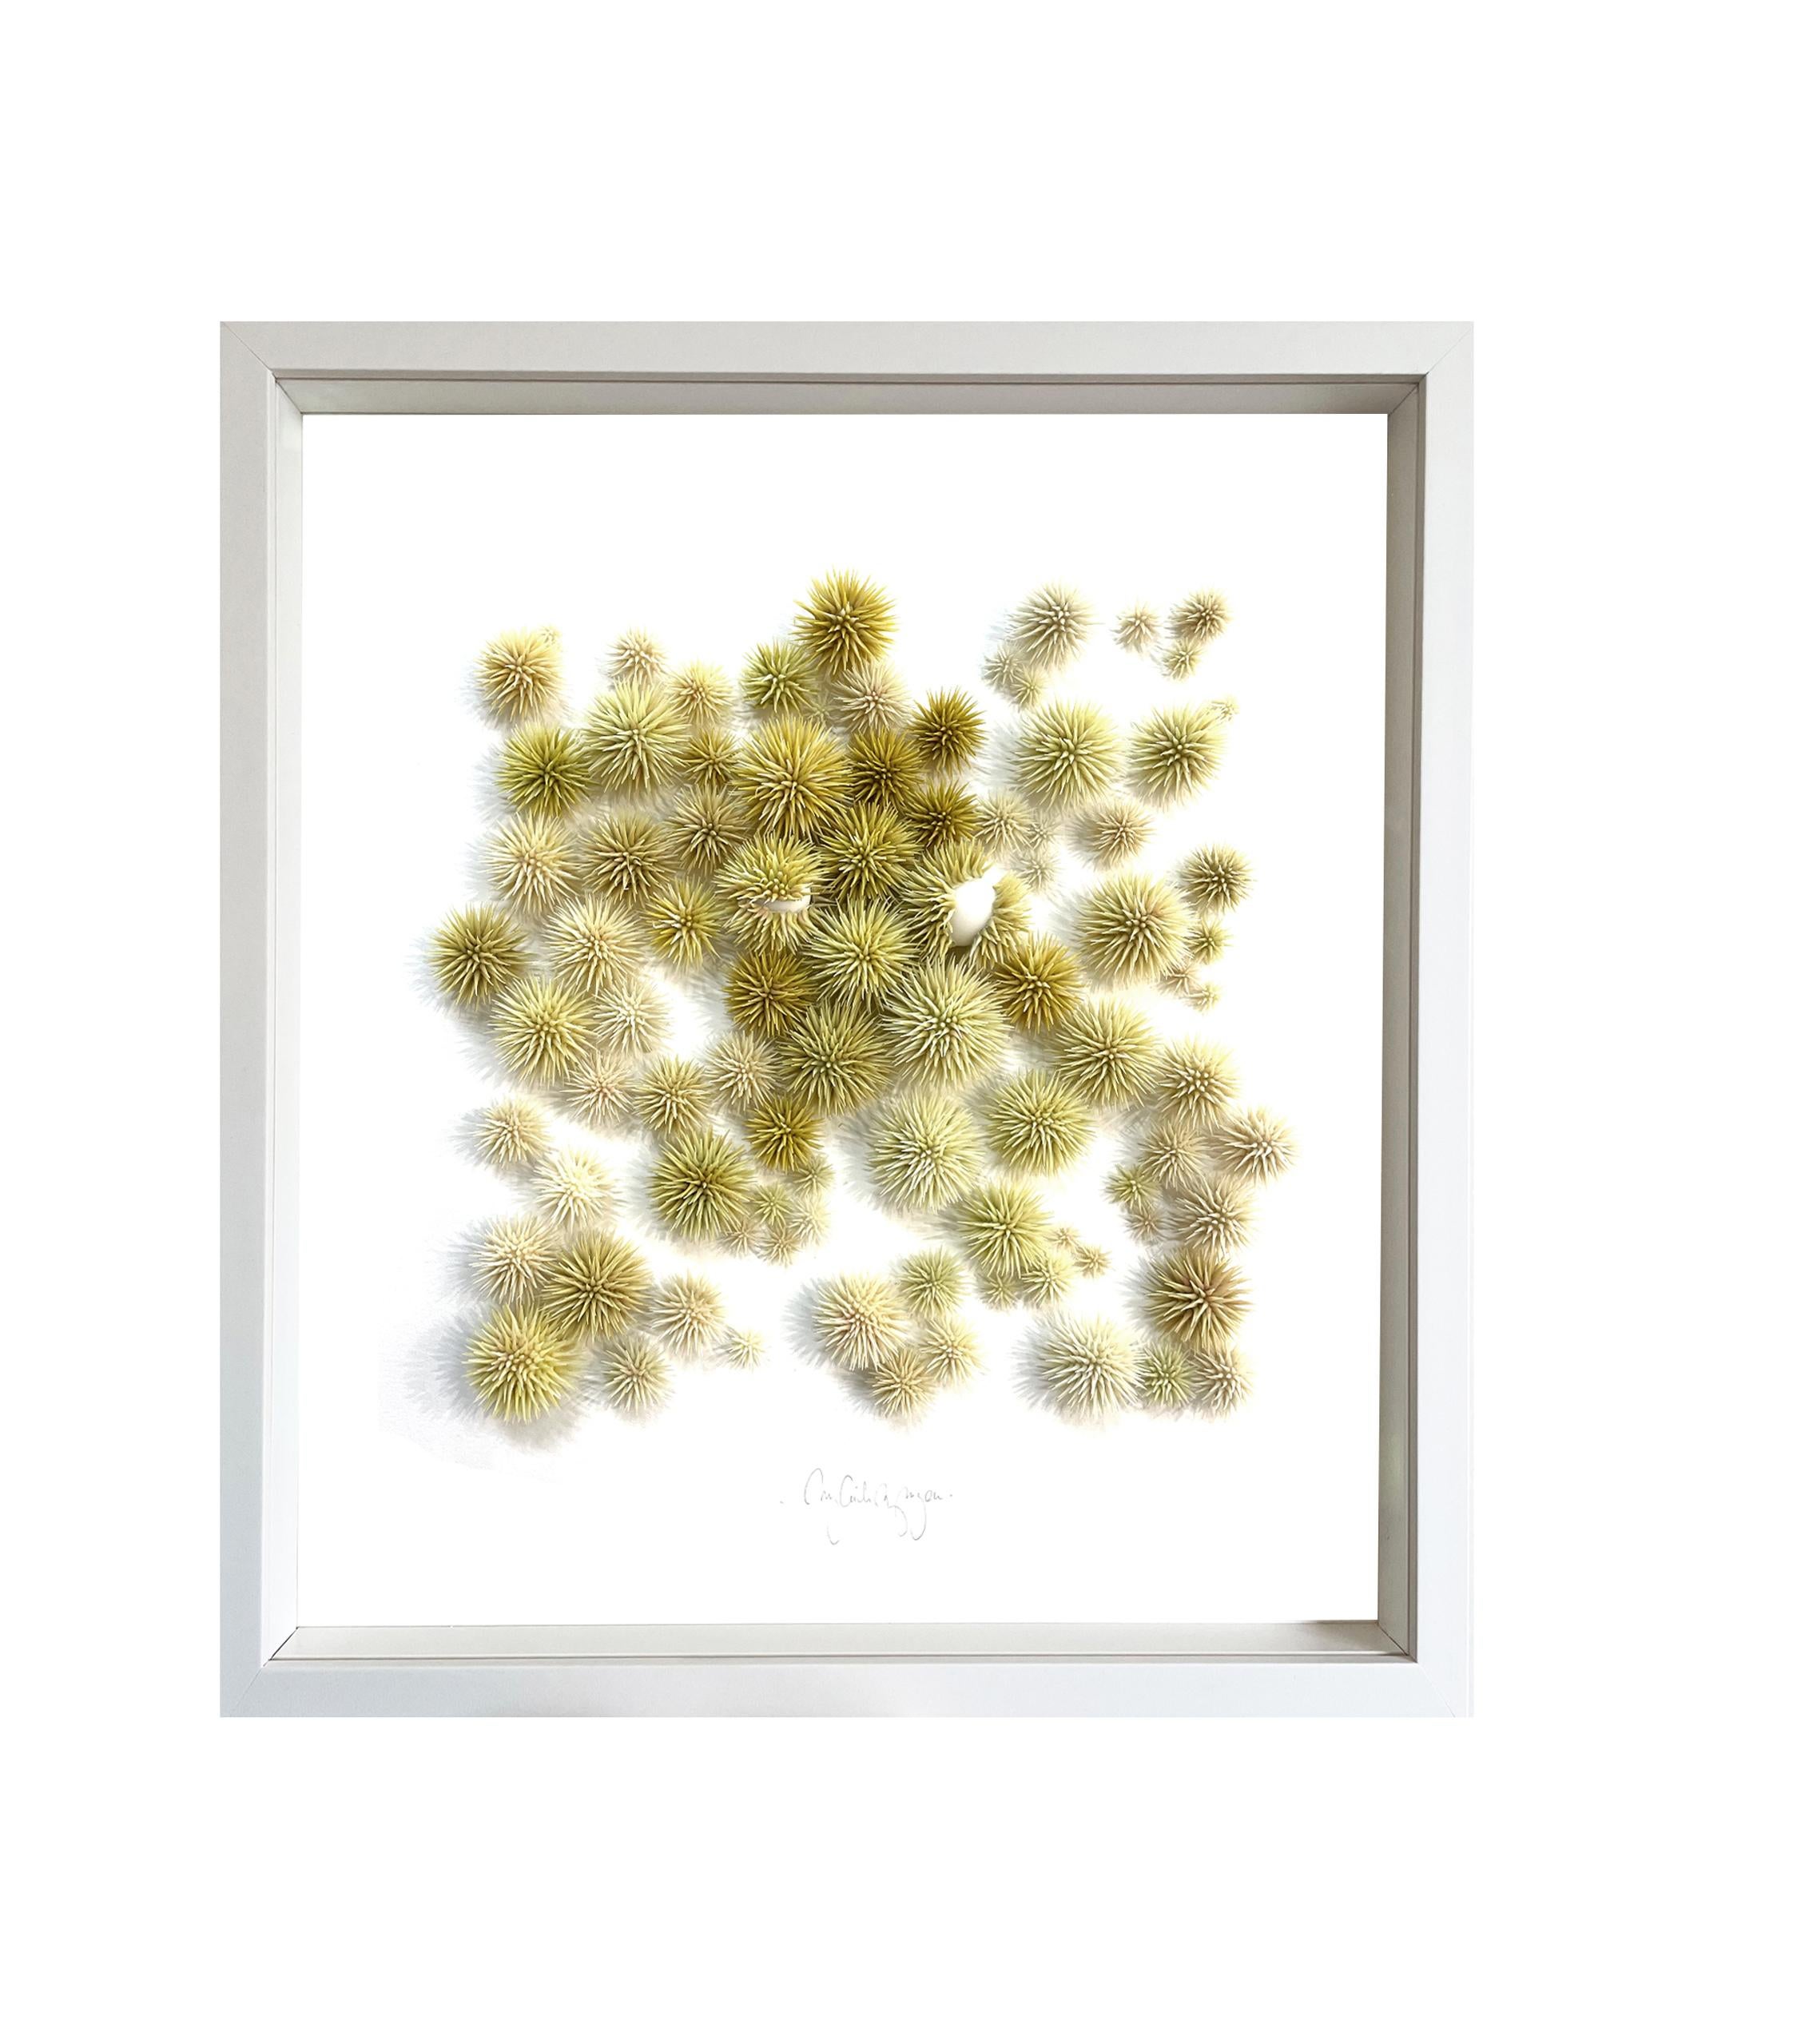 Sea Urchins - abstract nature inspired framed minimal collage of clay on paper - Mixed Media Art by Mylinh Ngyen